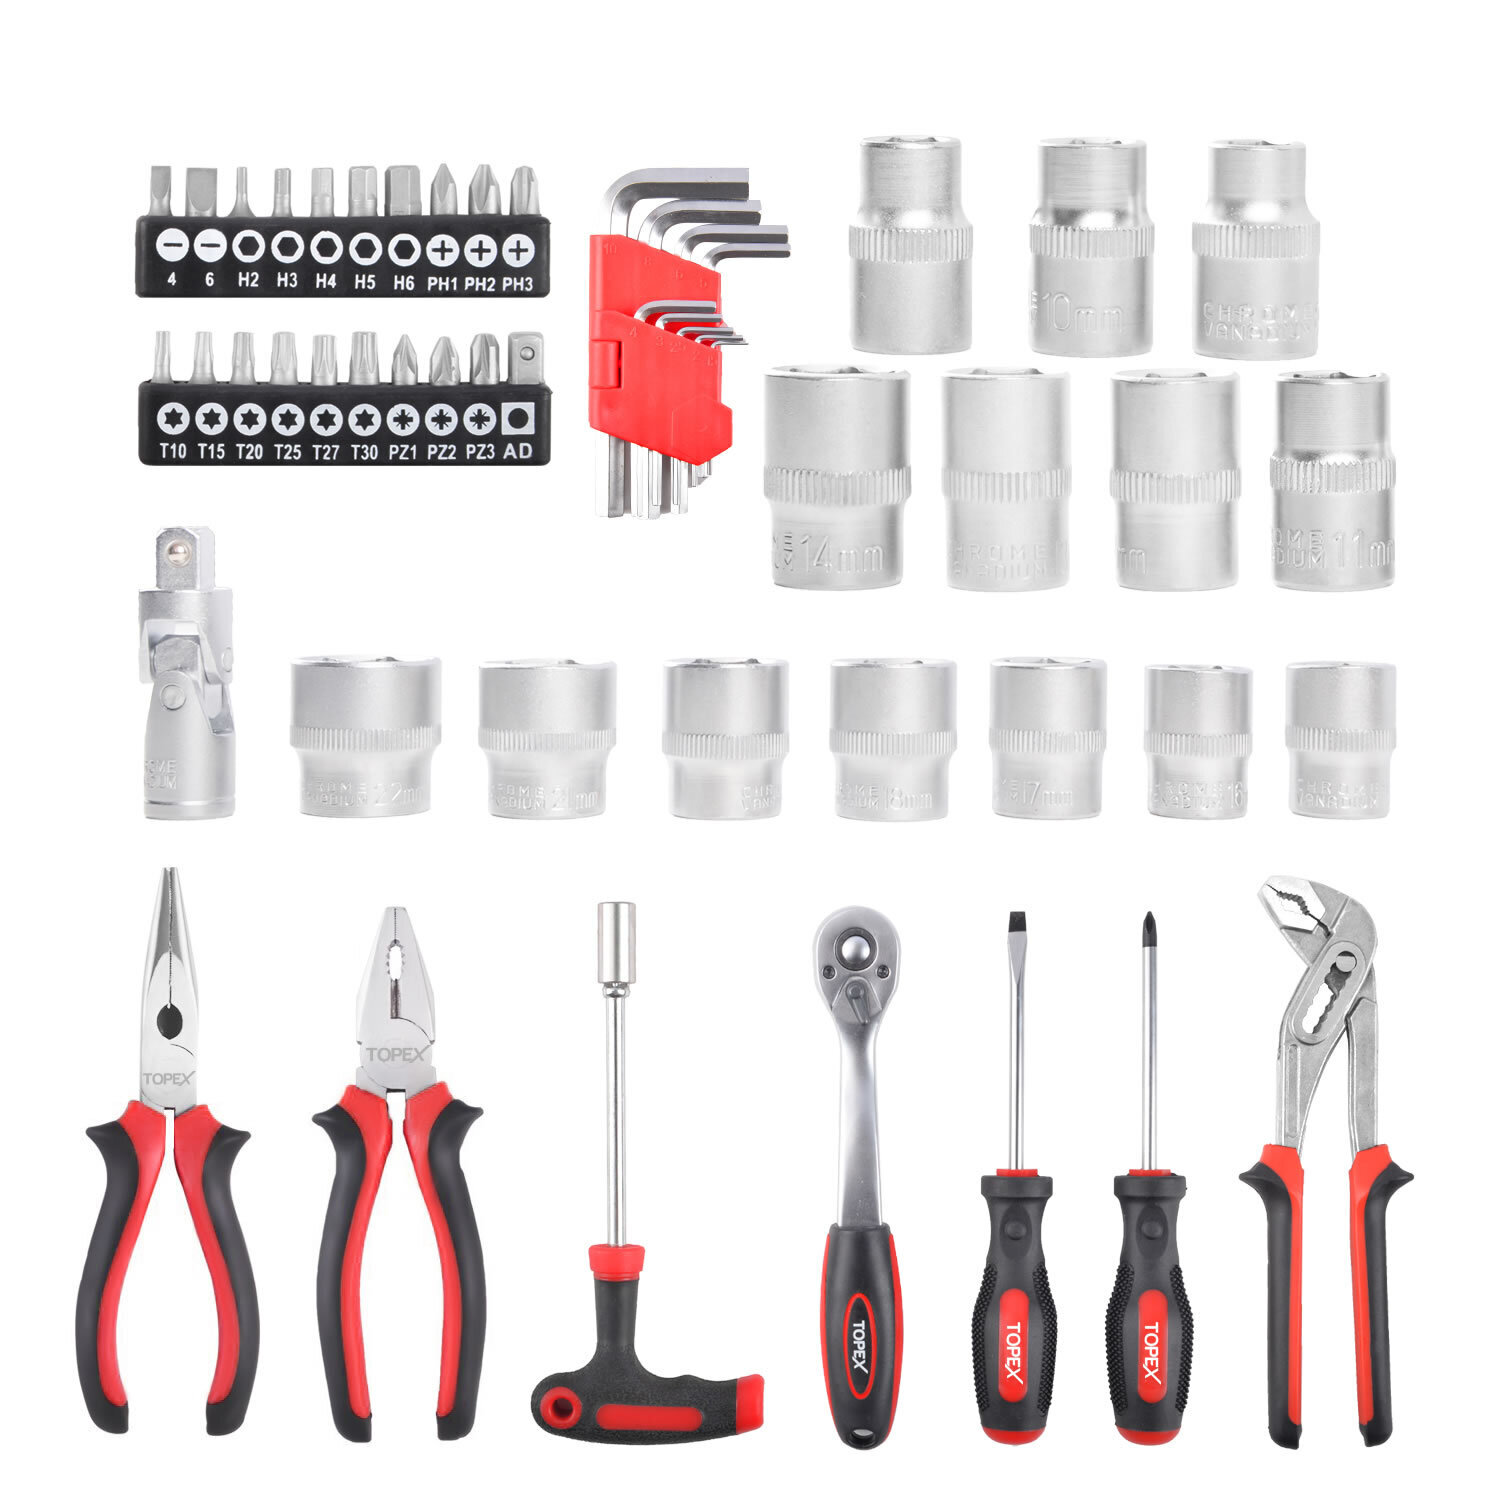 TOPEX 52-Piece Hand Tool Kit Portable Home/Auto Repair Set w/ Ratchet Wrench, Pliers ,Screwdriver Kits and Storage Case